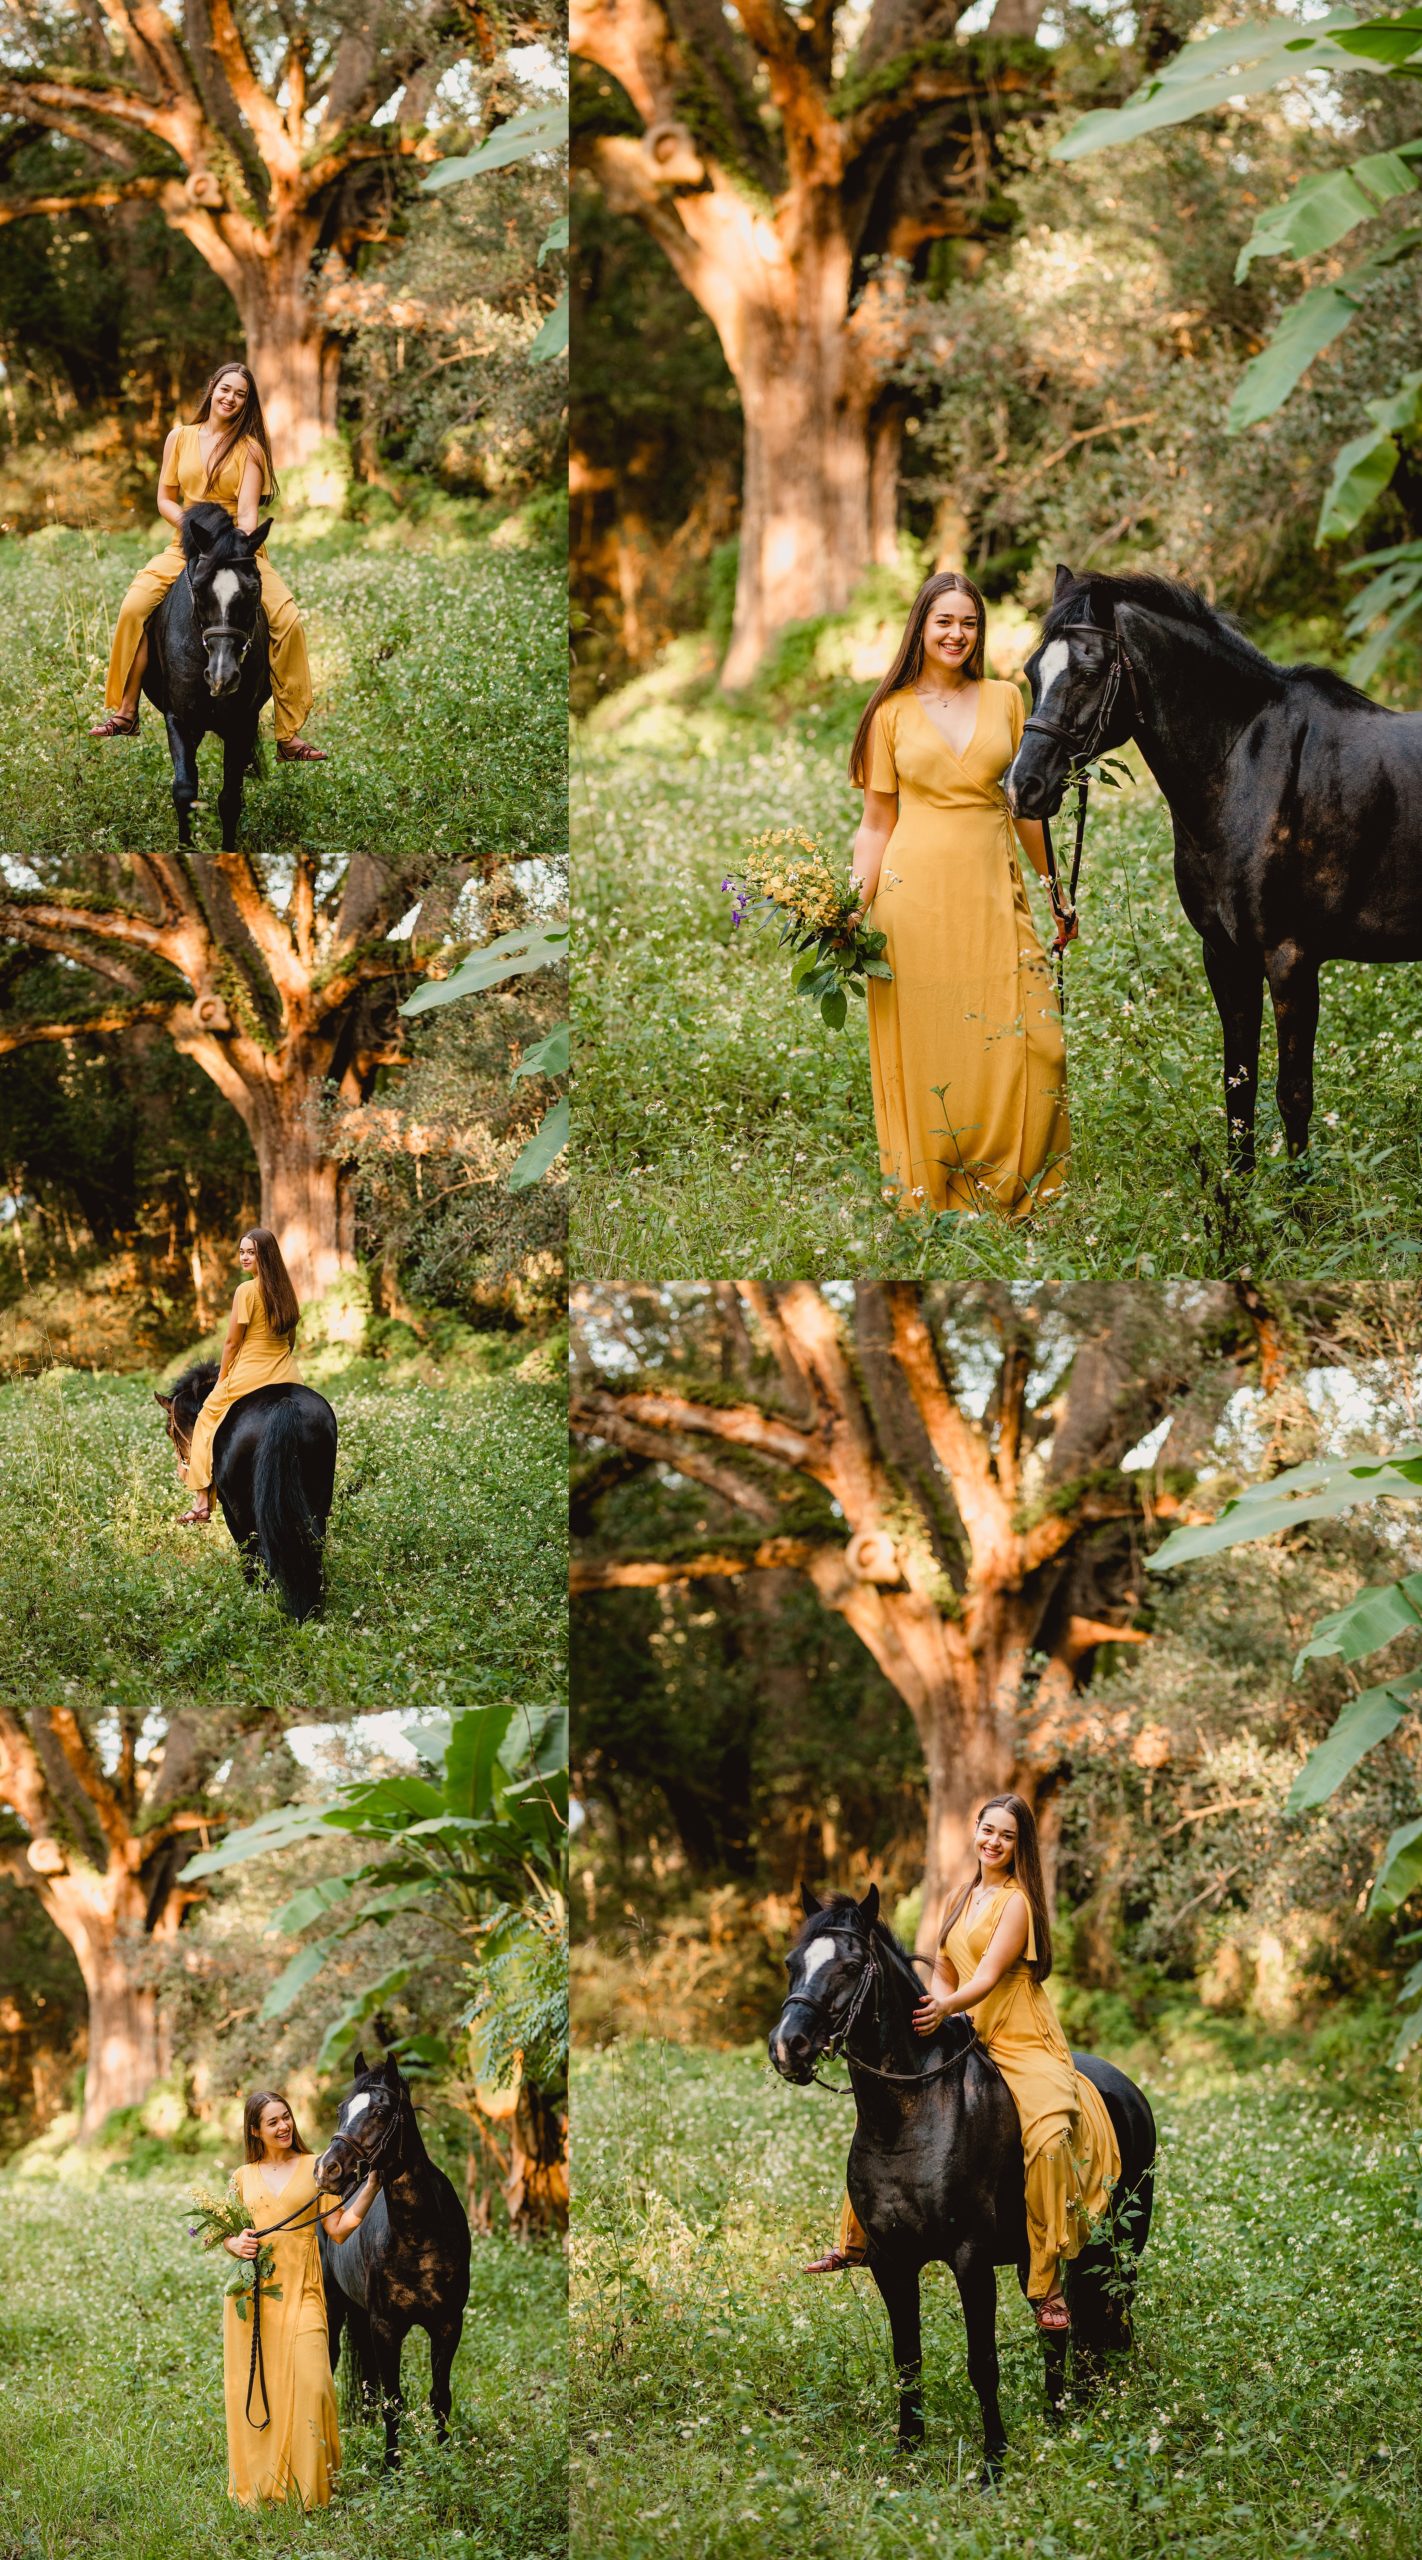 Outfits to wear with black horses.